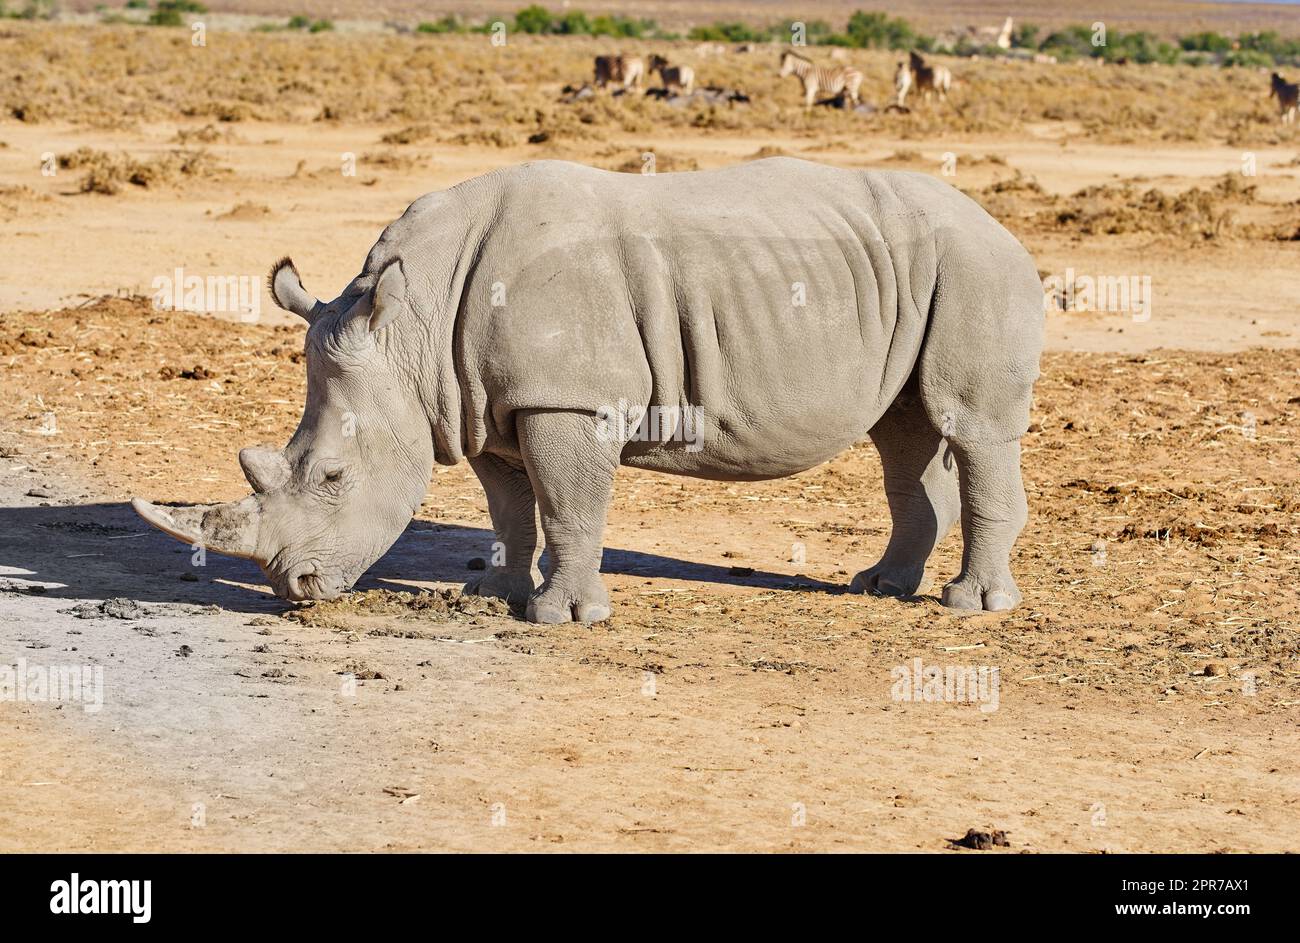 A rhino grazing on a dry brownfield on a safari in South Africa. Large animal standing and feeding in a wilderness habitat with caries different species of mammals in the background in nature Stock Photo